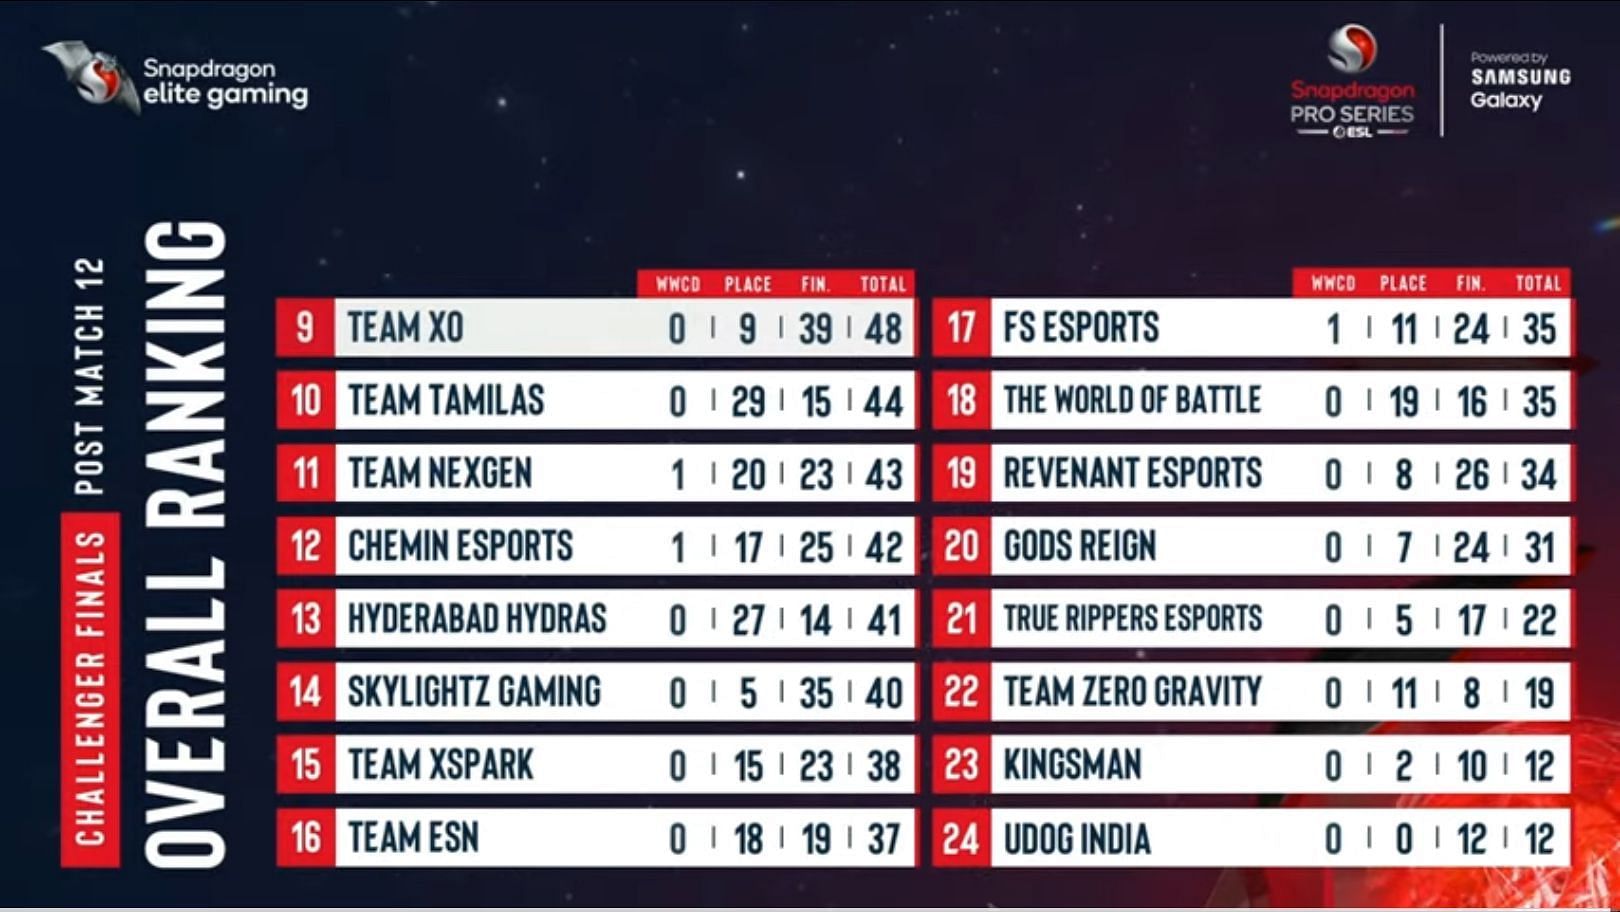 Kingsman and UDOG claimed 12 points each in PUBG New State Challenger Finale (Image via Nodwin Gaming)